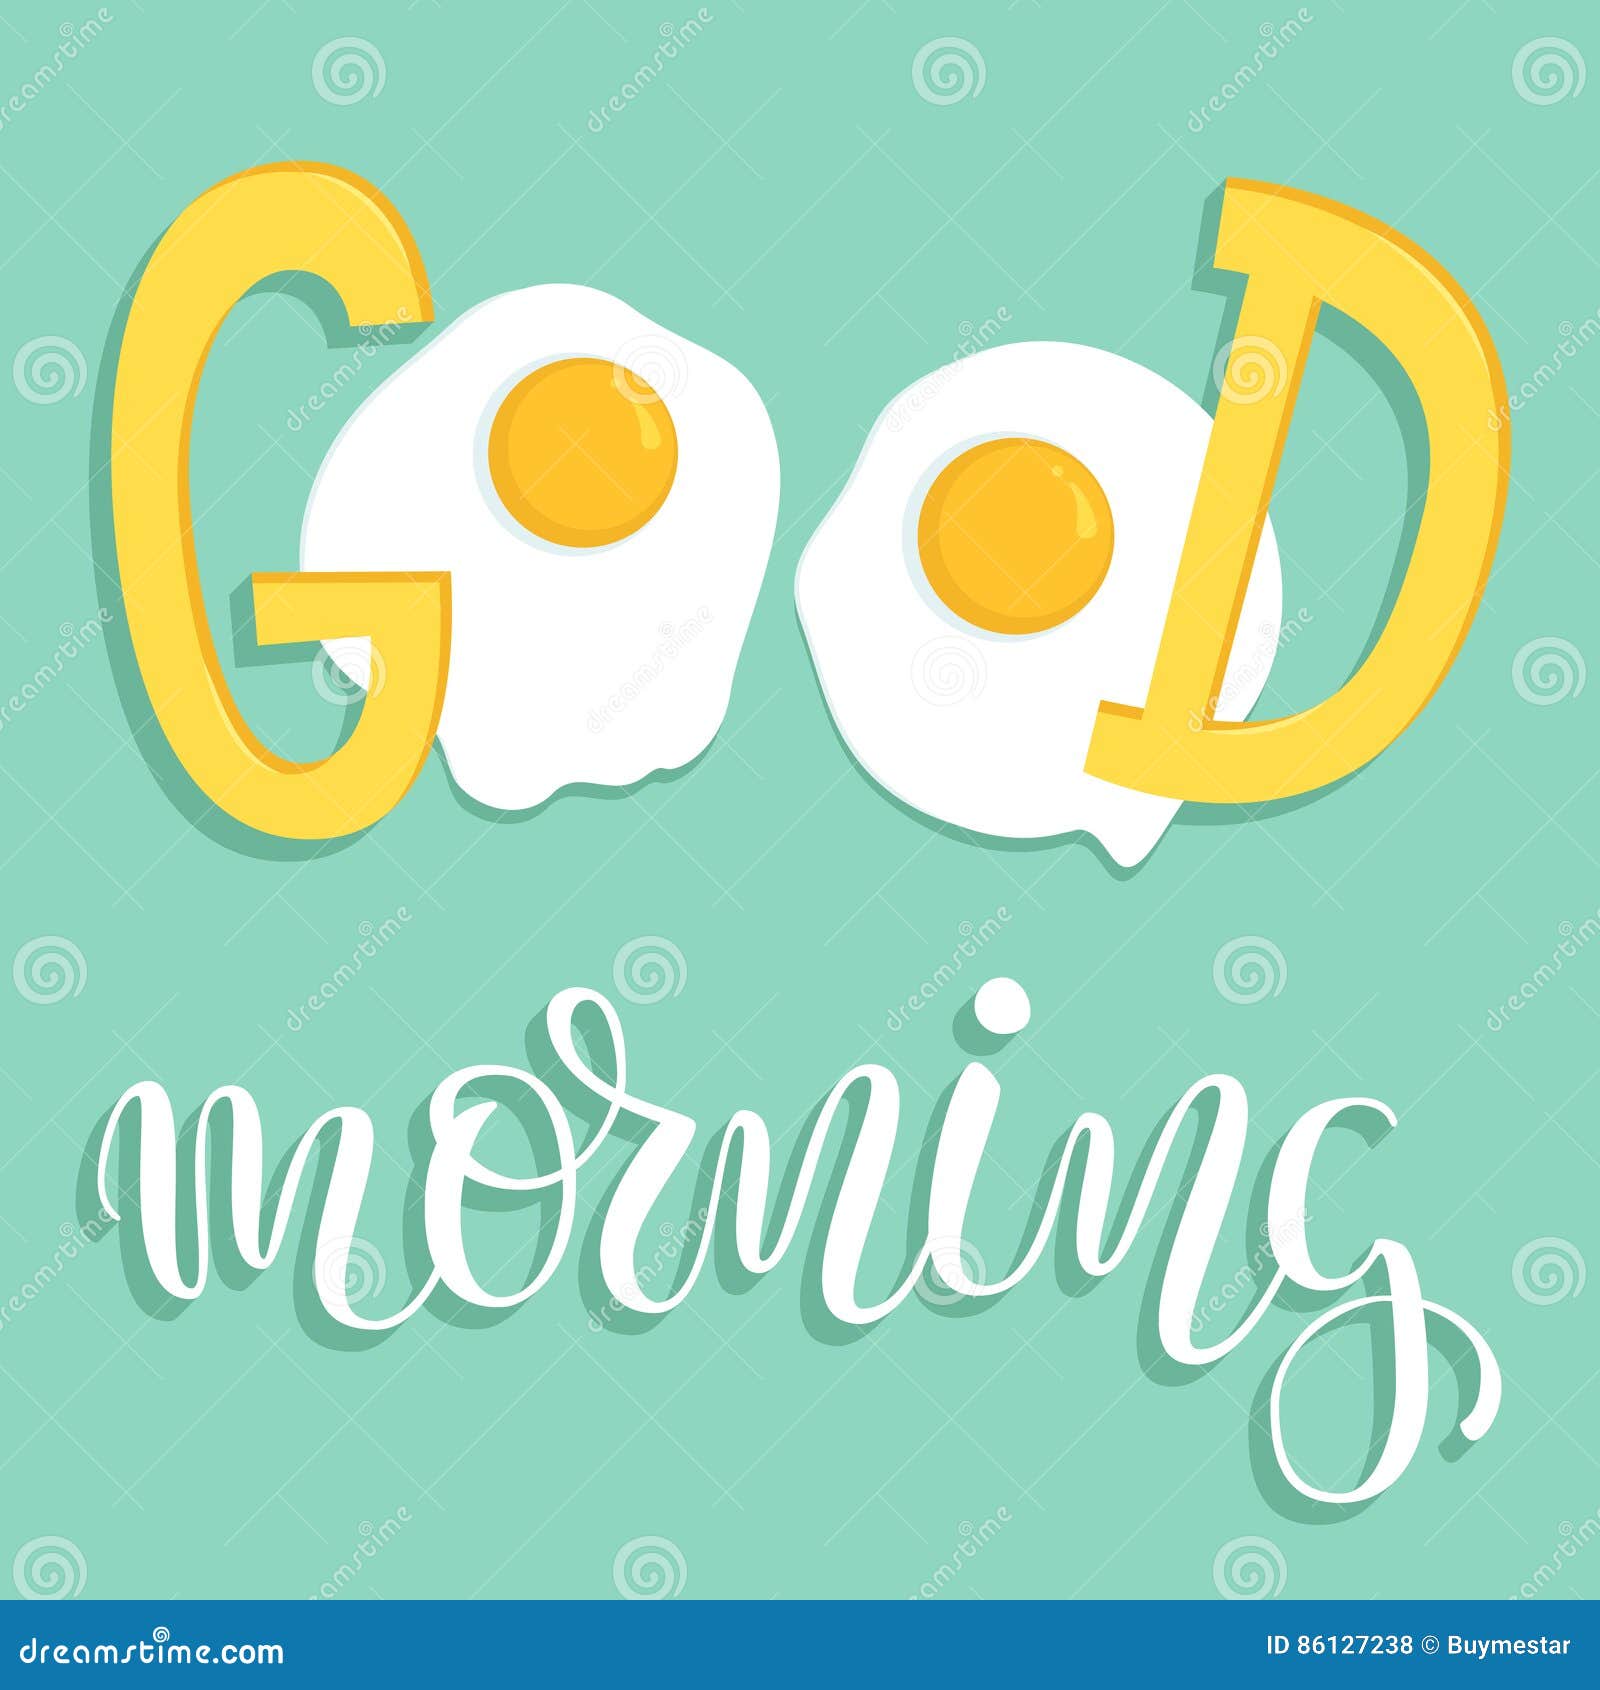 Good Morning! Breakfast Poster with Fried Eggs. Vector Illustration ...